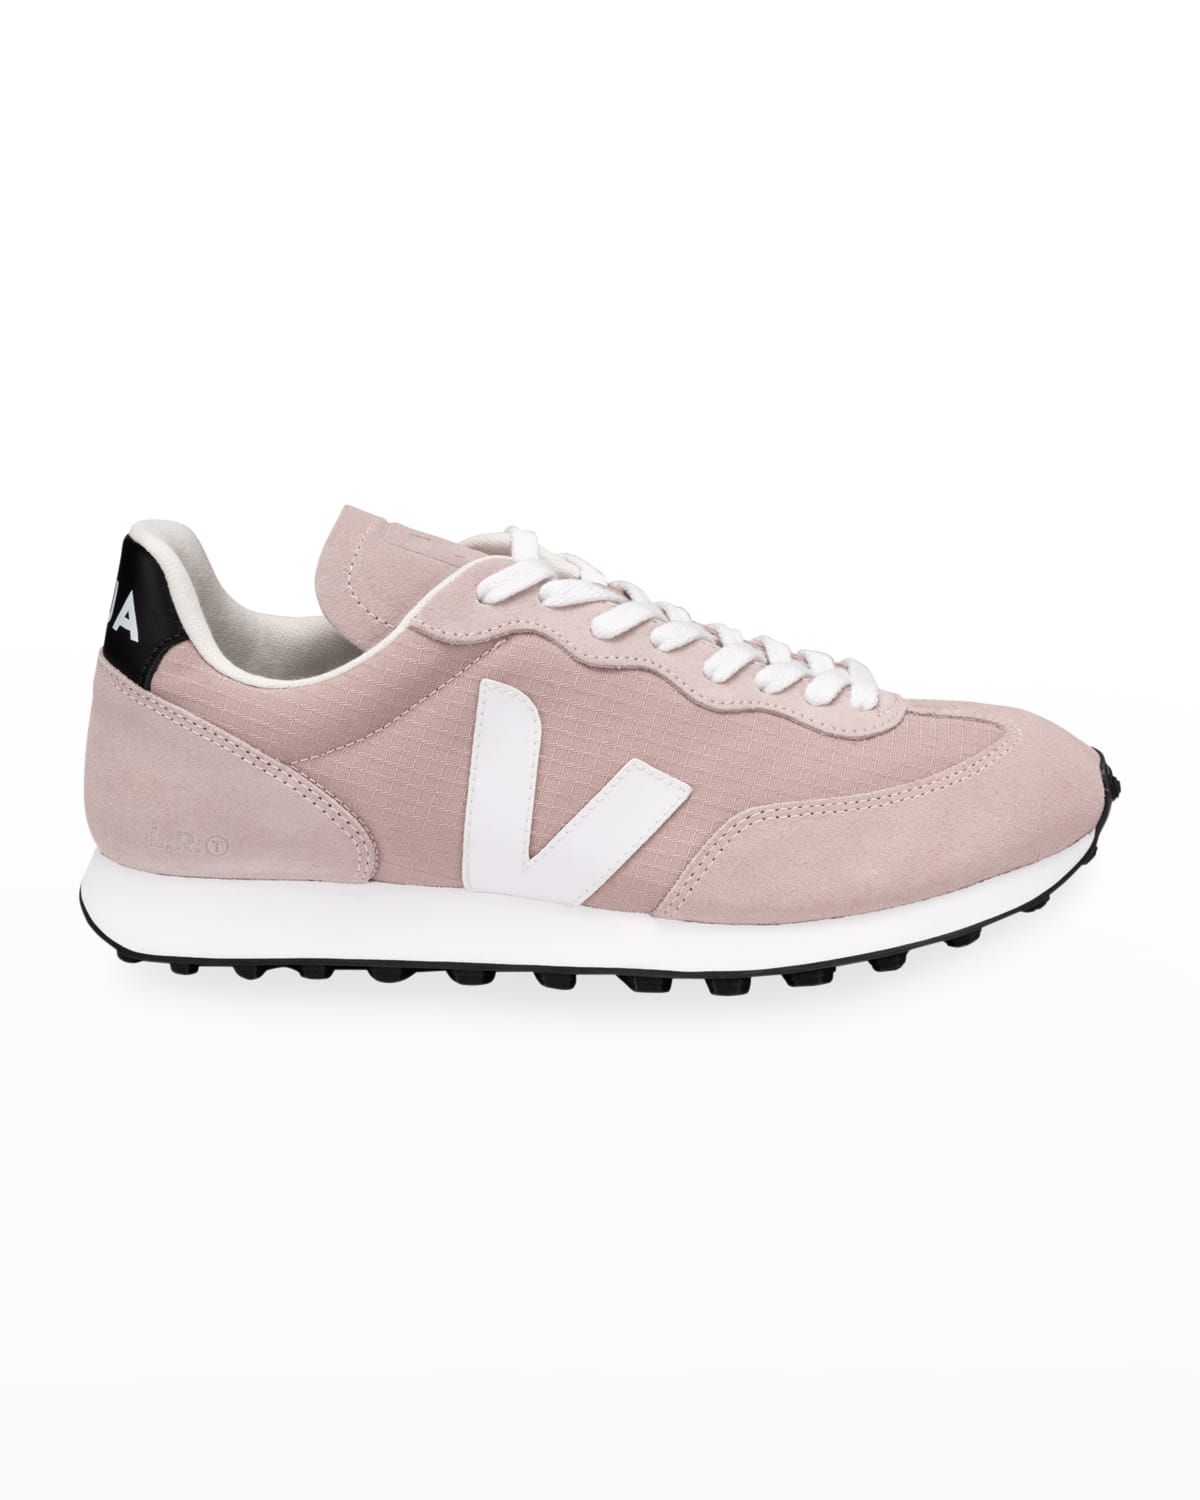 Rio Branco Mixed Leather Runner Sneakers | Neiman Marcus